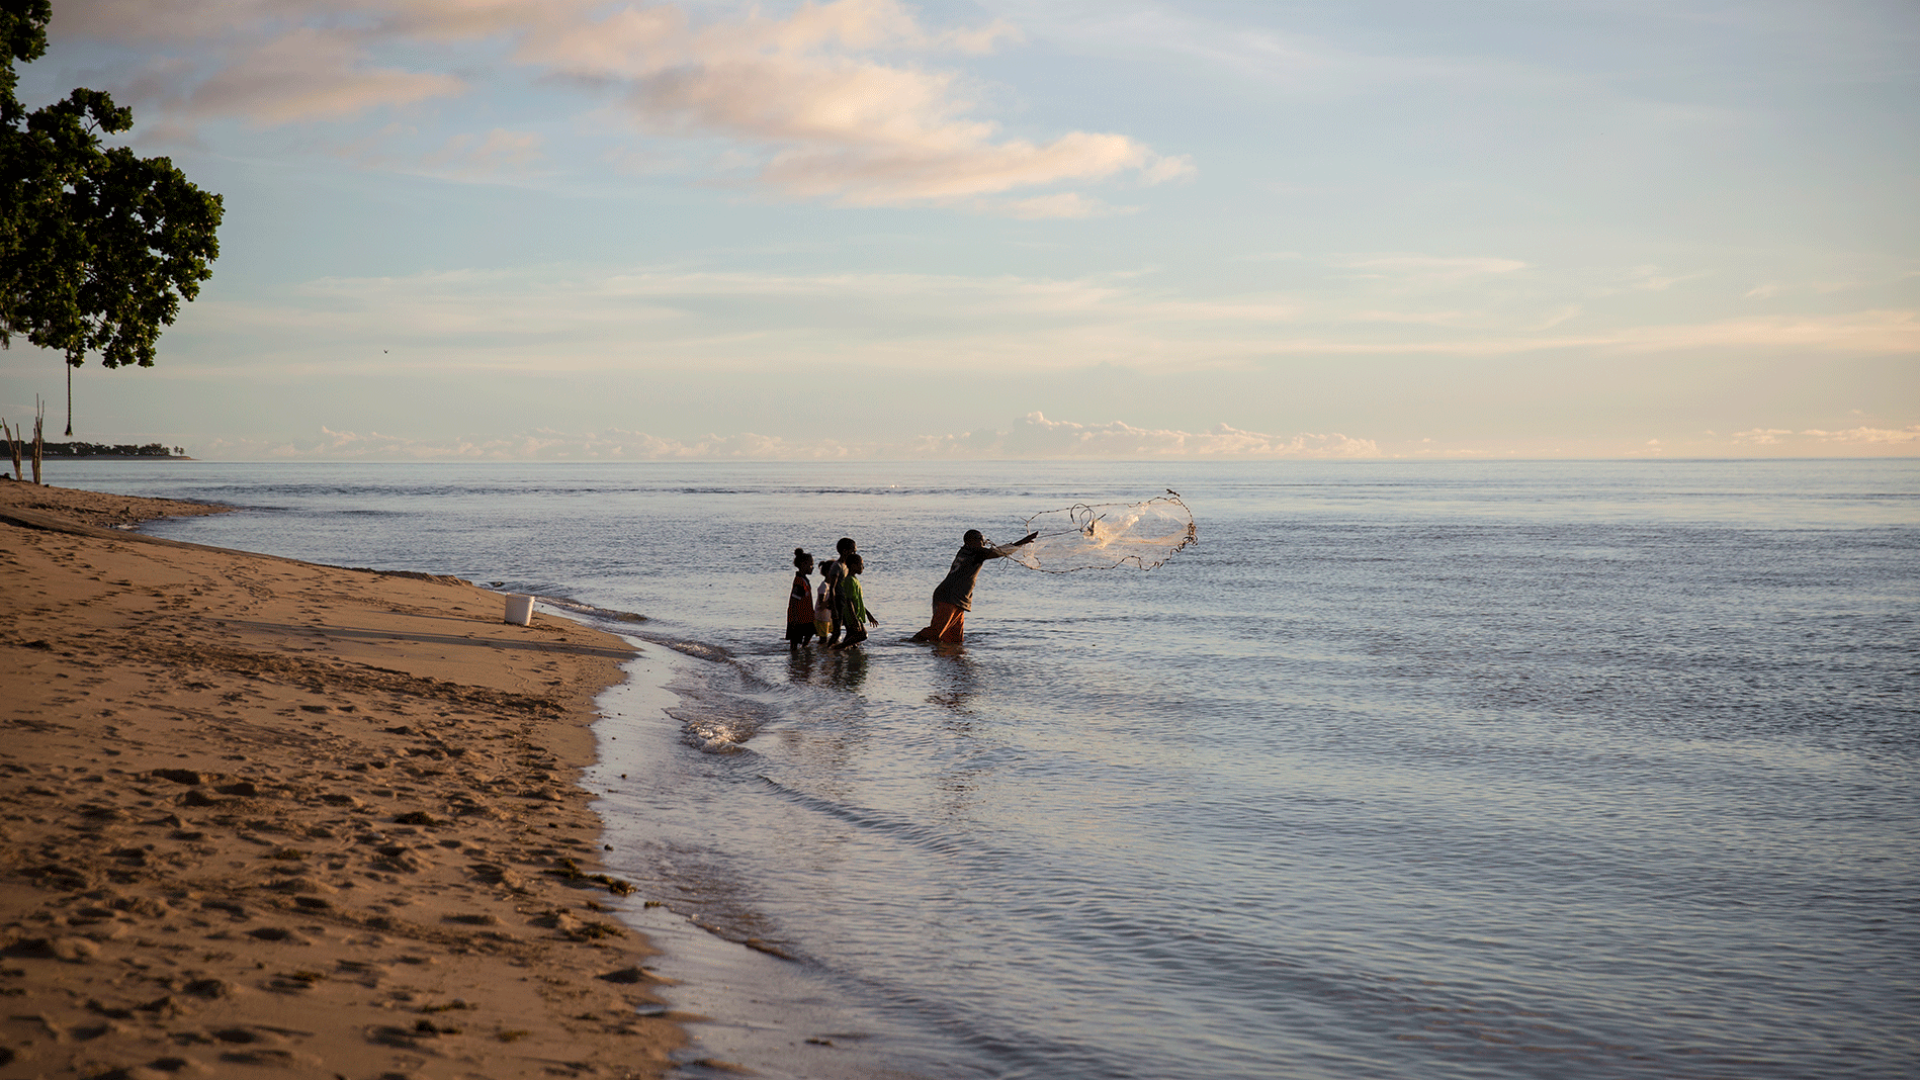 People castnetting at beach